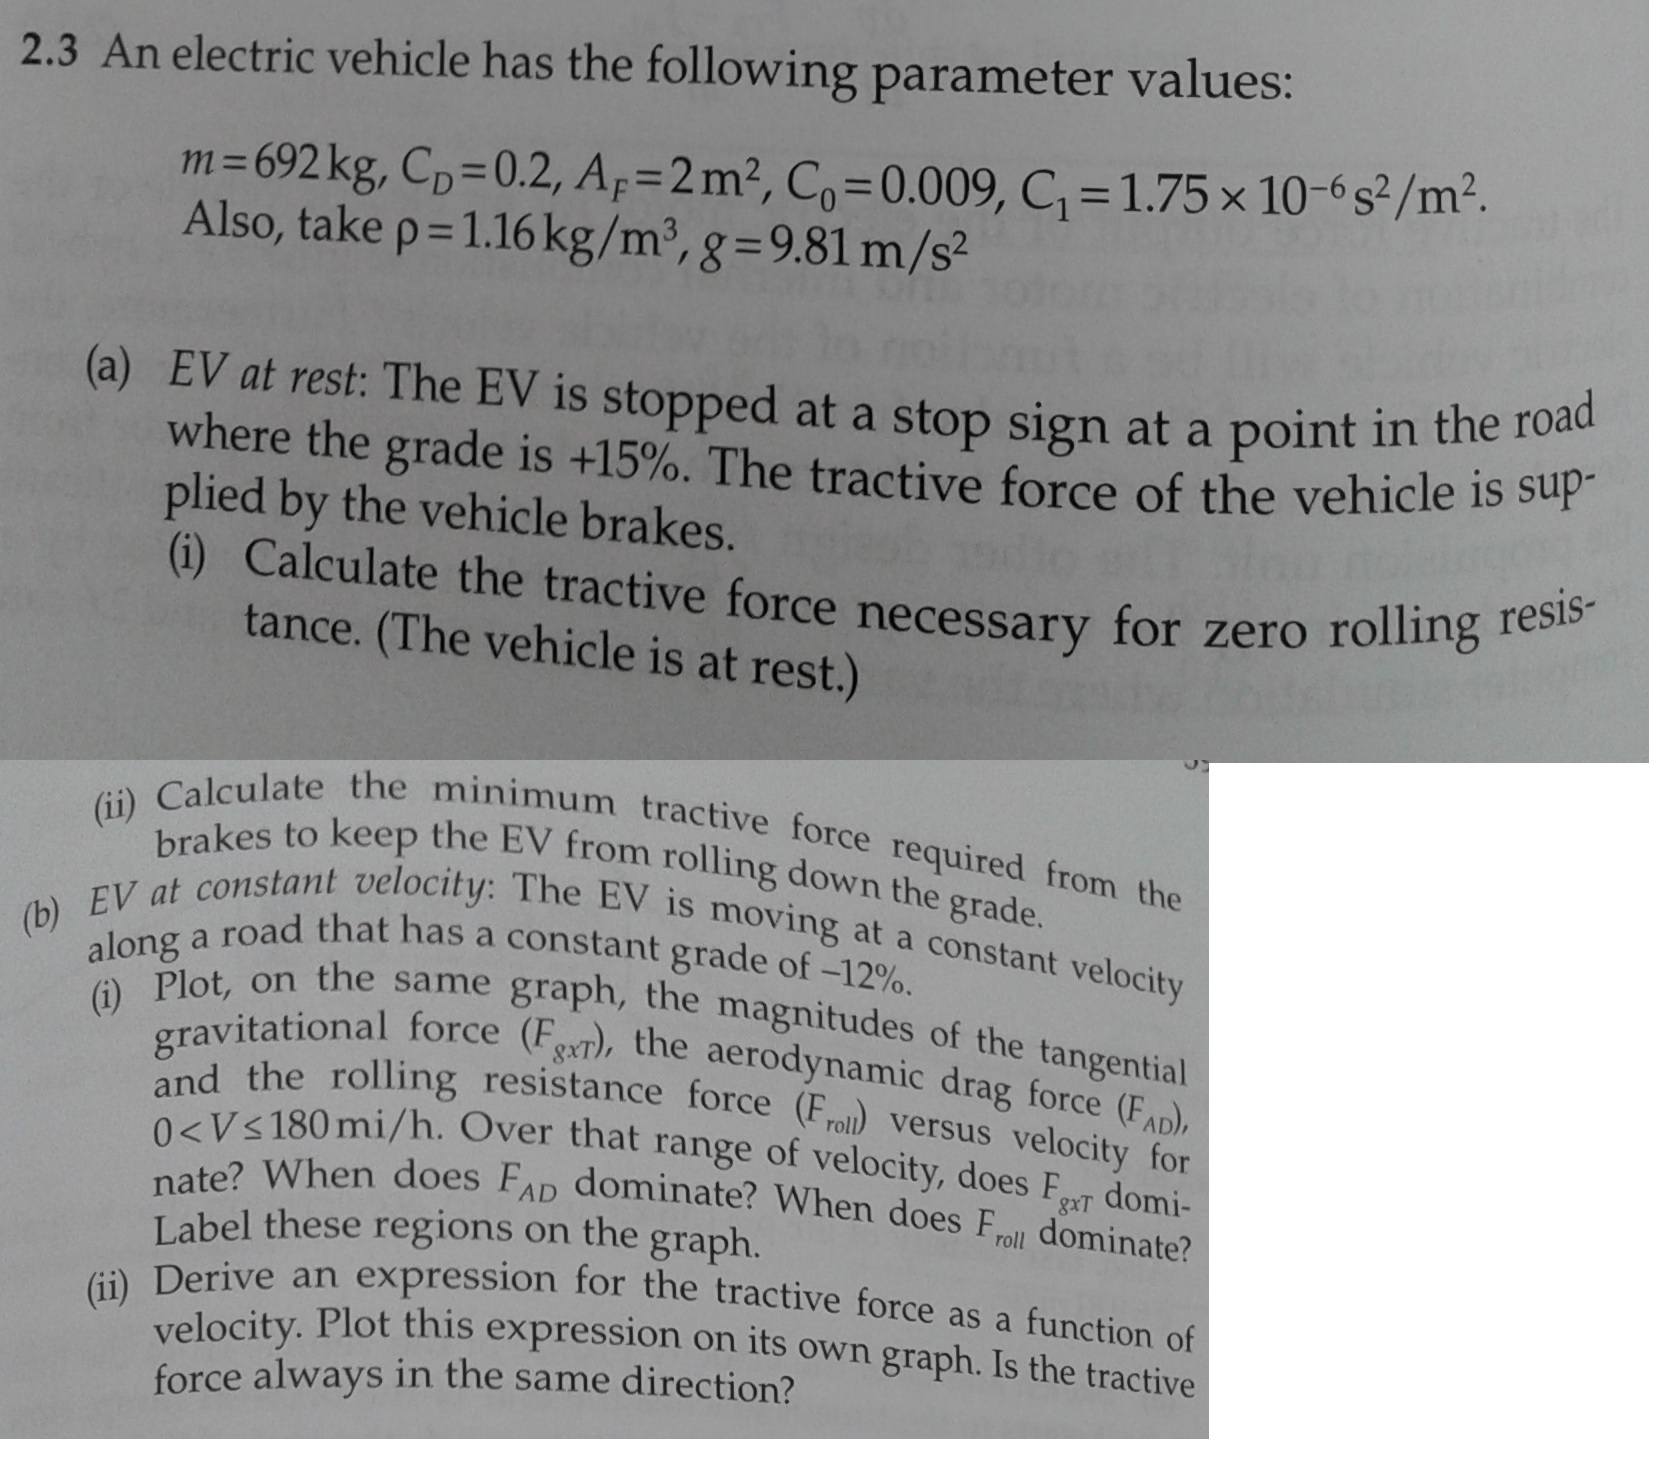 An electric vehicle has the following parameter